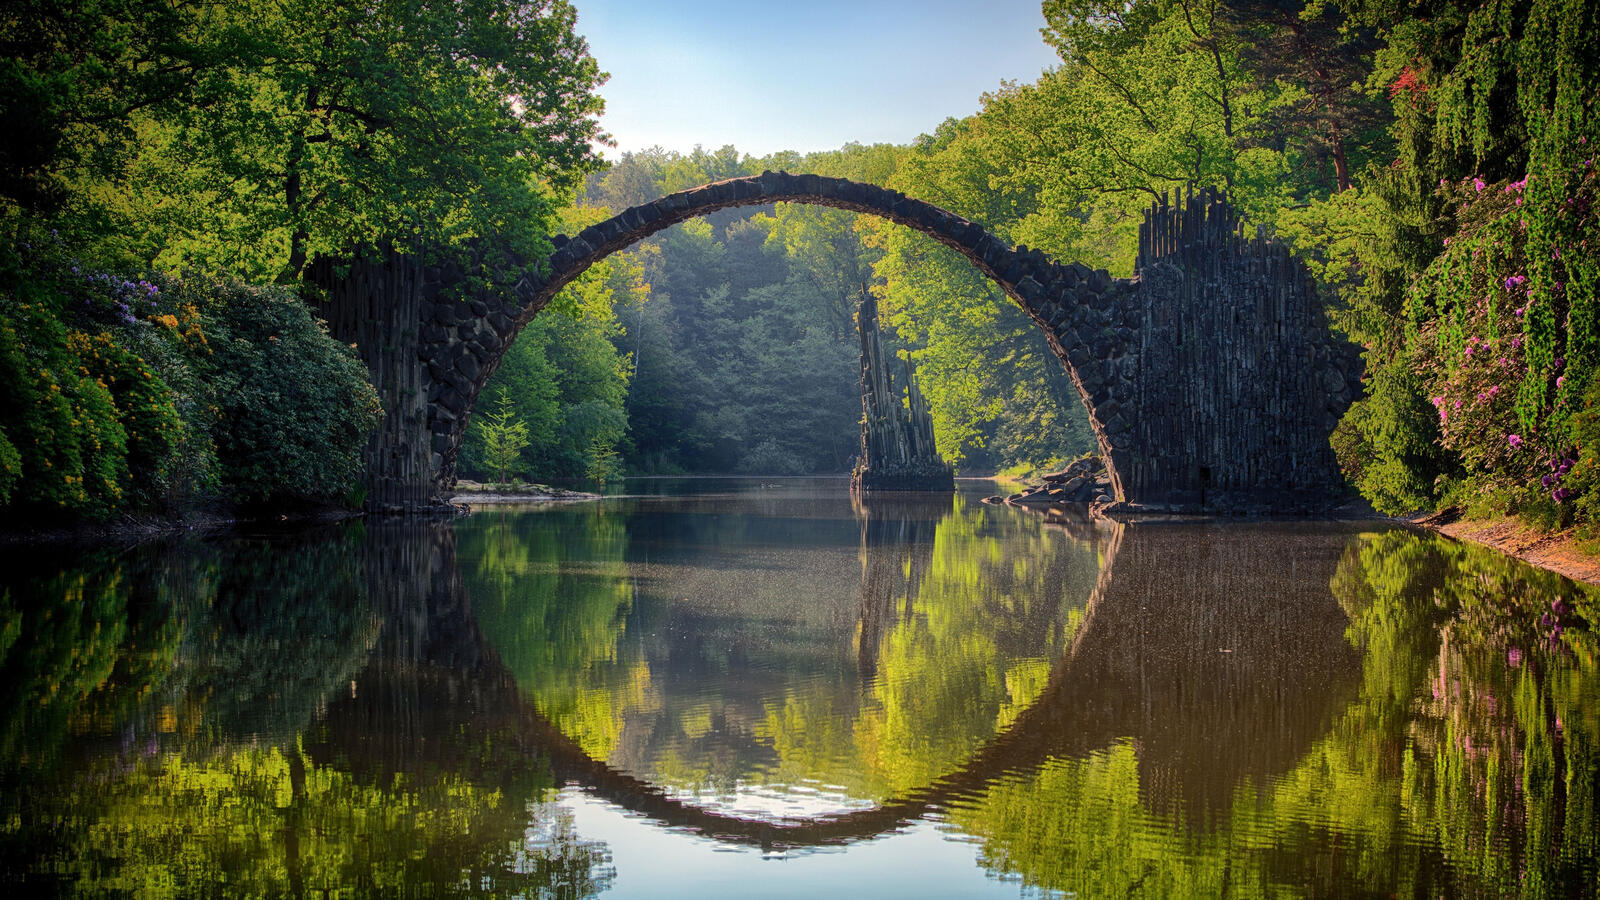 Free photo A large stone bridge over a lake in the woods